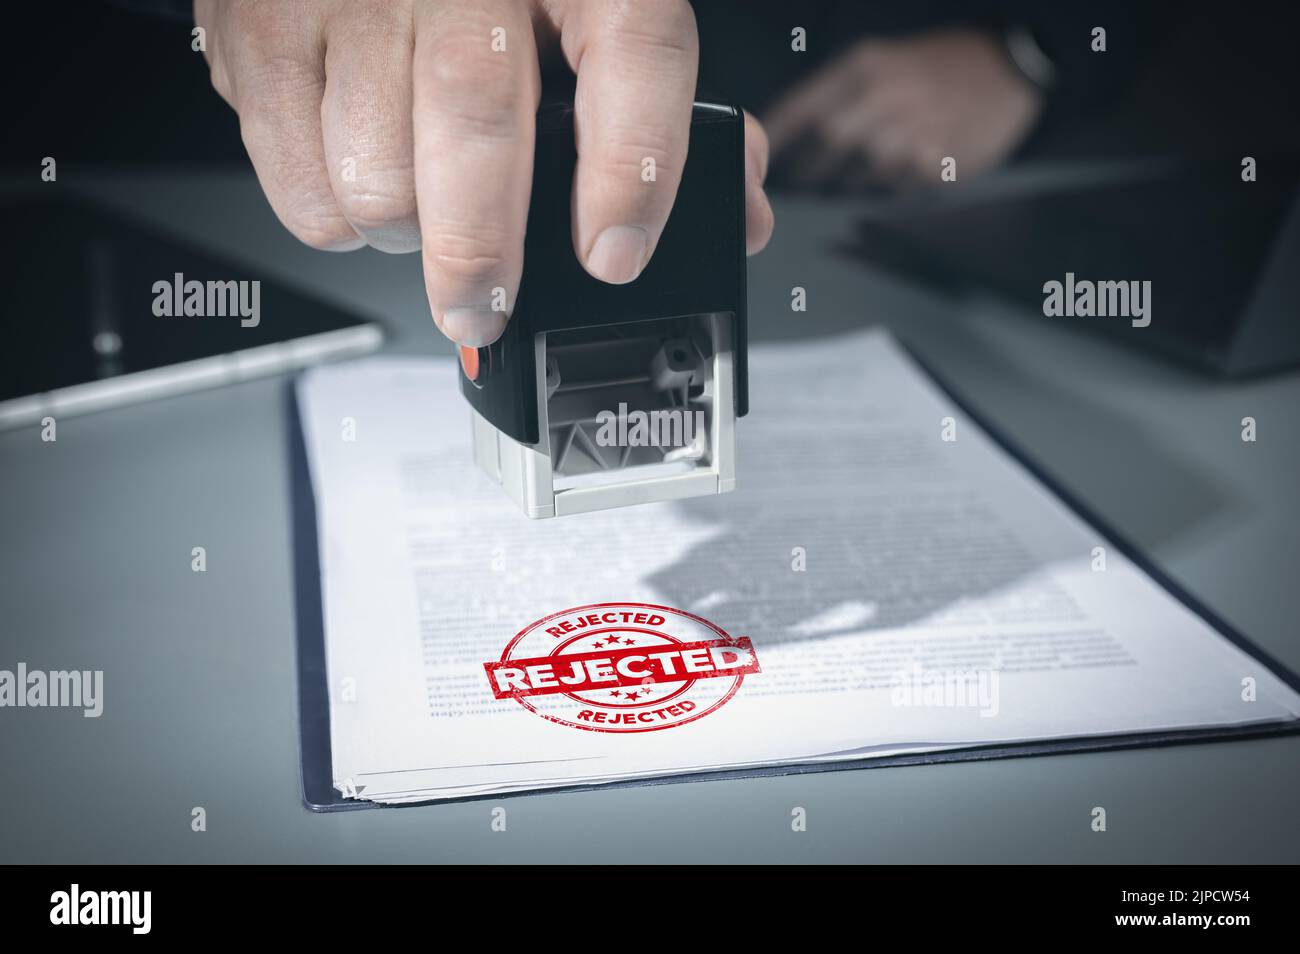 Close-up Of Person Hand Stamping With Rejected Stamp On Text denied Document At Desk, Contract Form Paper. Businessman signing business project reject Stock Photo